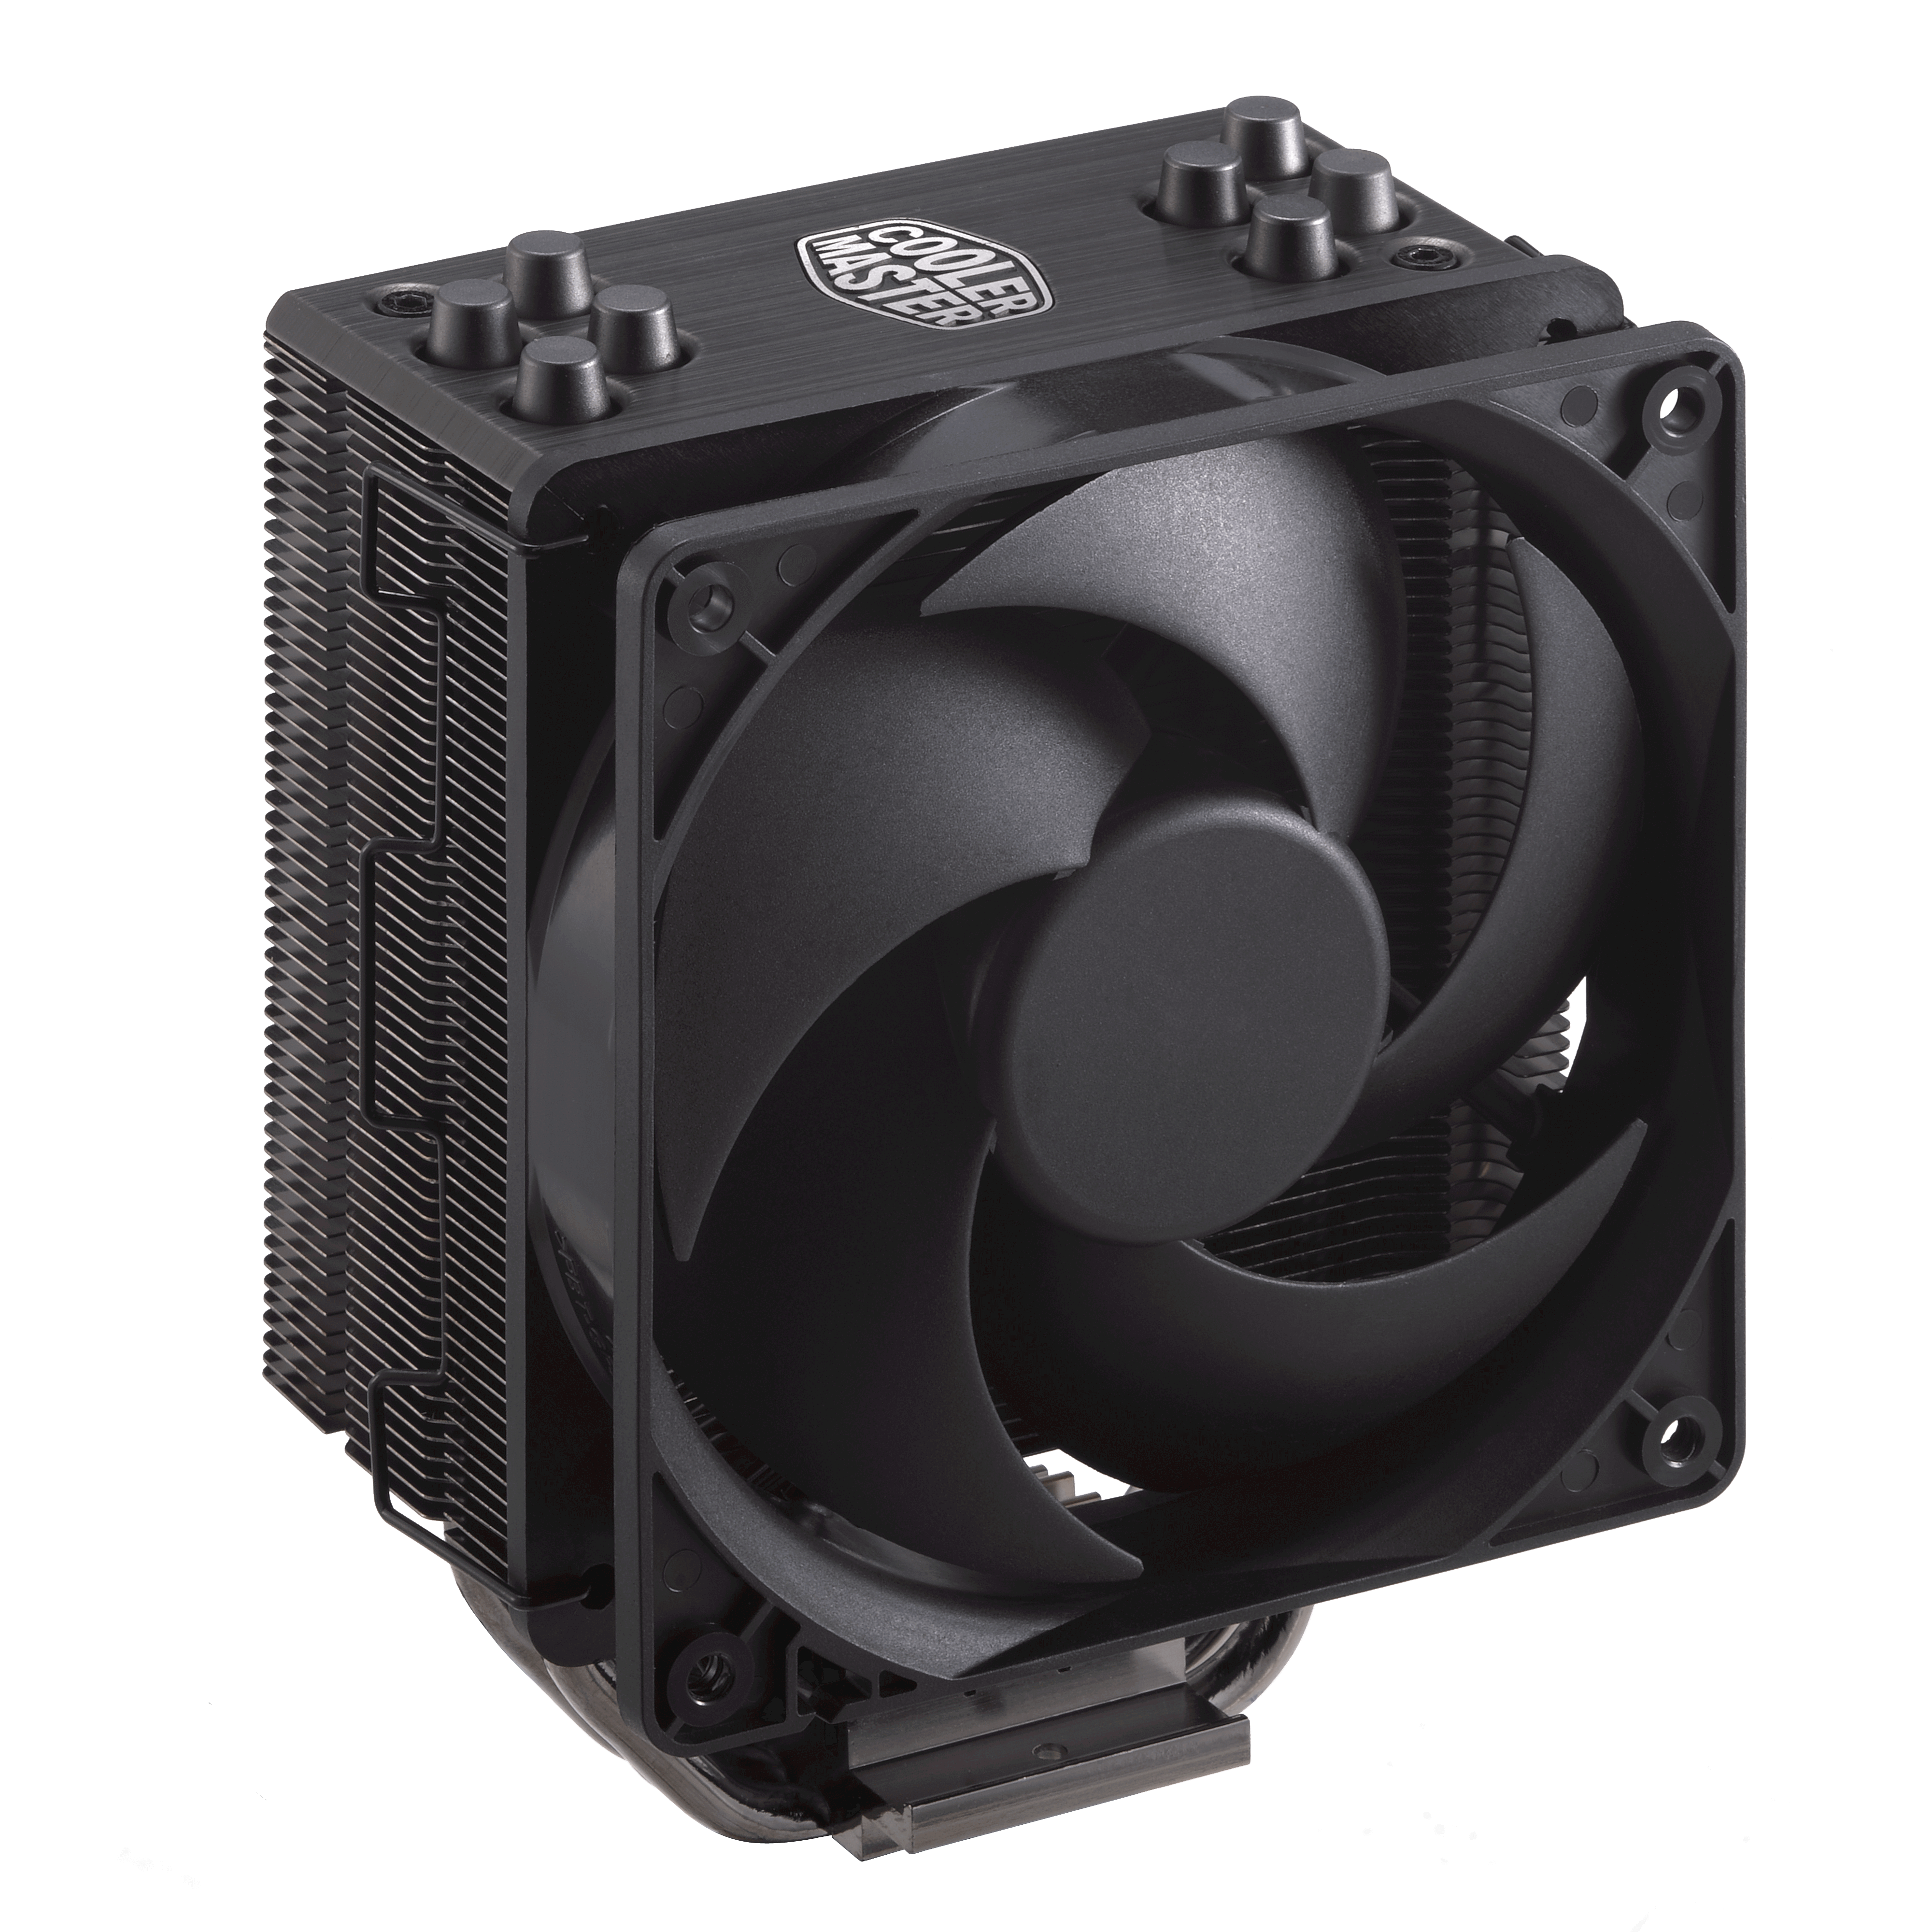 Cooler Master Out-of-The Box Kits for LGA 1700 and Intel Alder Lake Processors Hyper 212 EVO V2 and MasterAir MA612 Stealth Series 